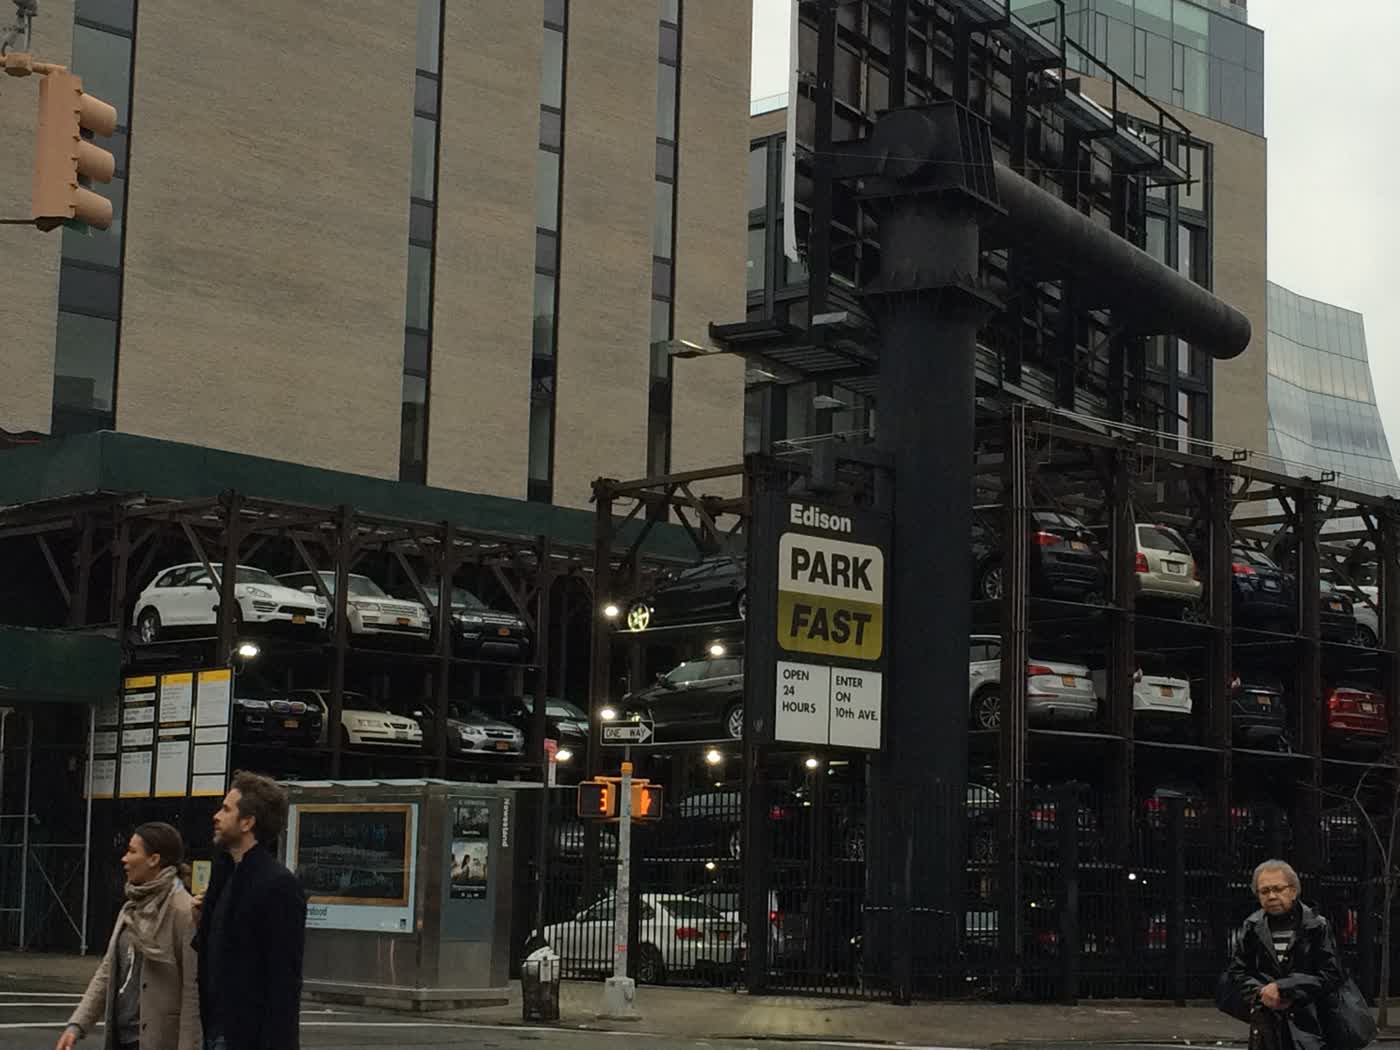 A parking lot where cars are put up on some kind of metallic vertical scaffolding.